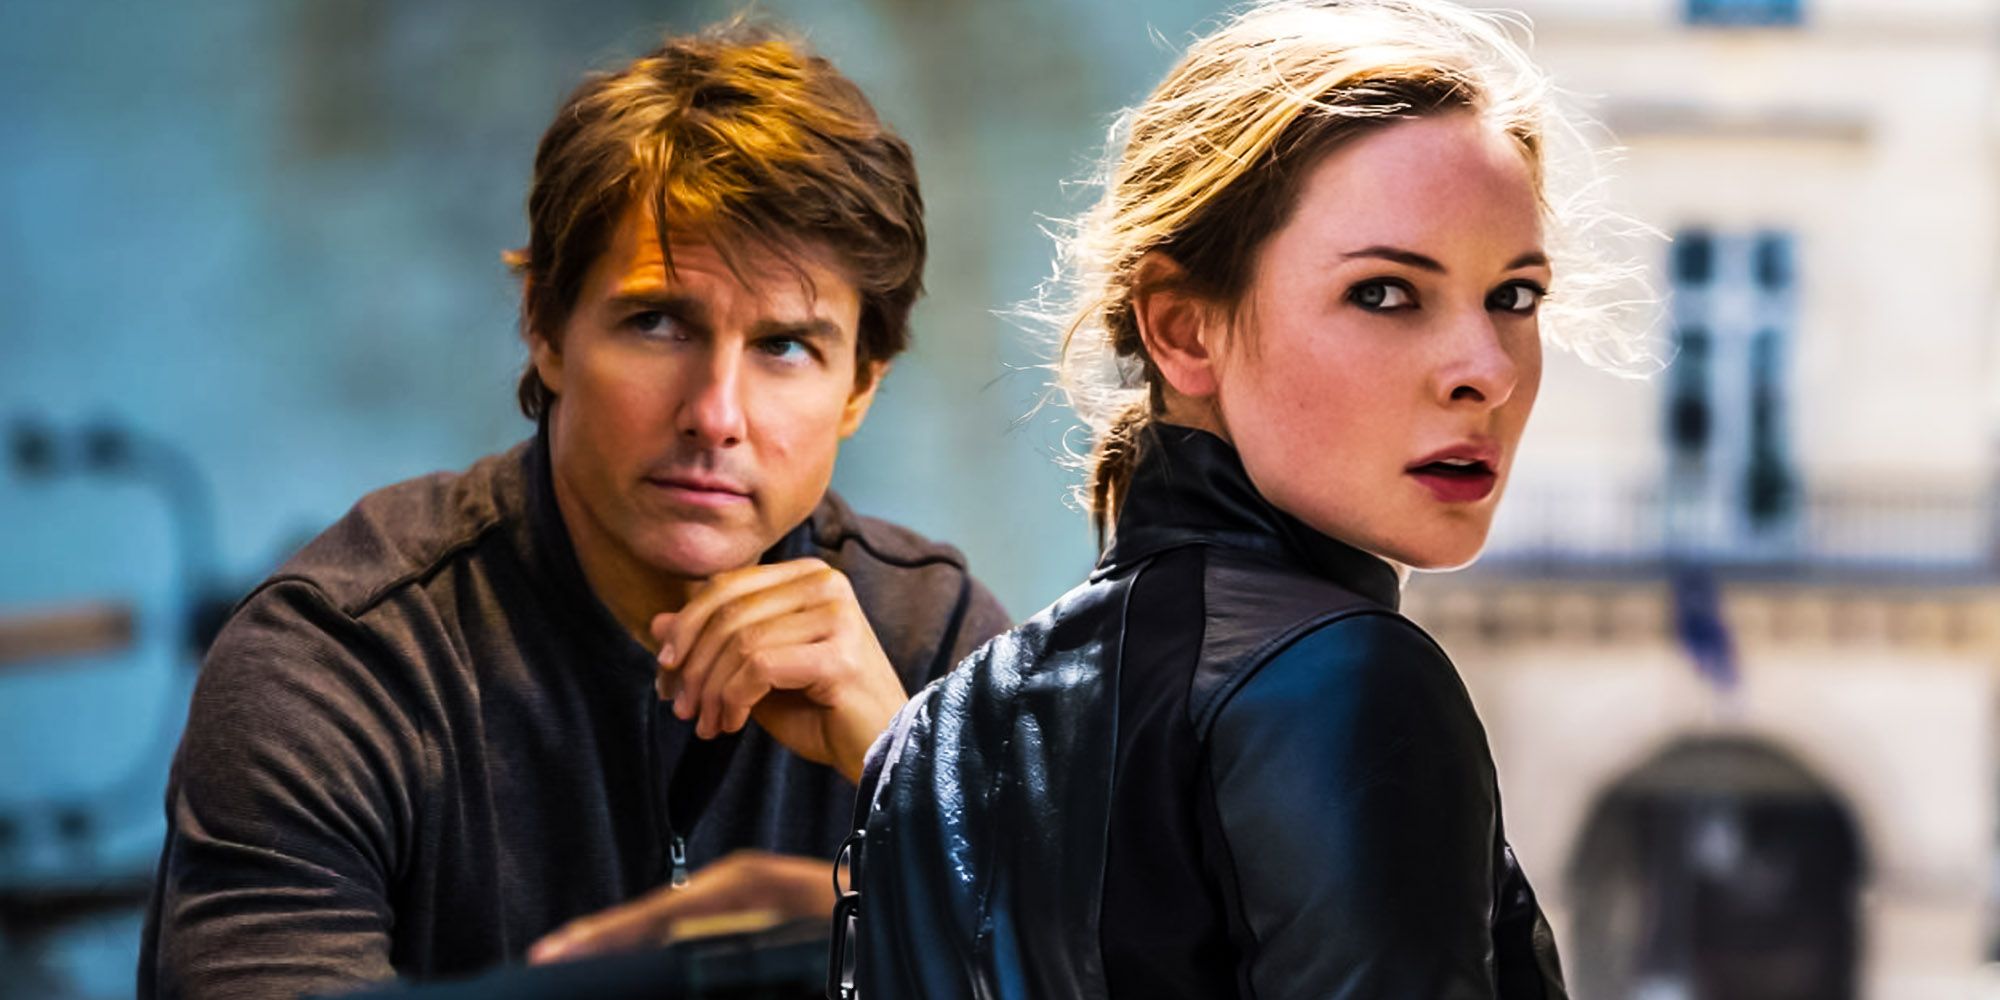 Mission impossible 7 Can Payoff A Cut Ethan and Isla Scene tom cruise rebecca furgeson